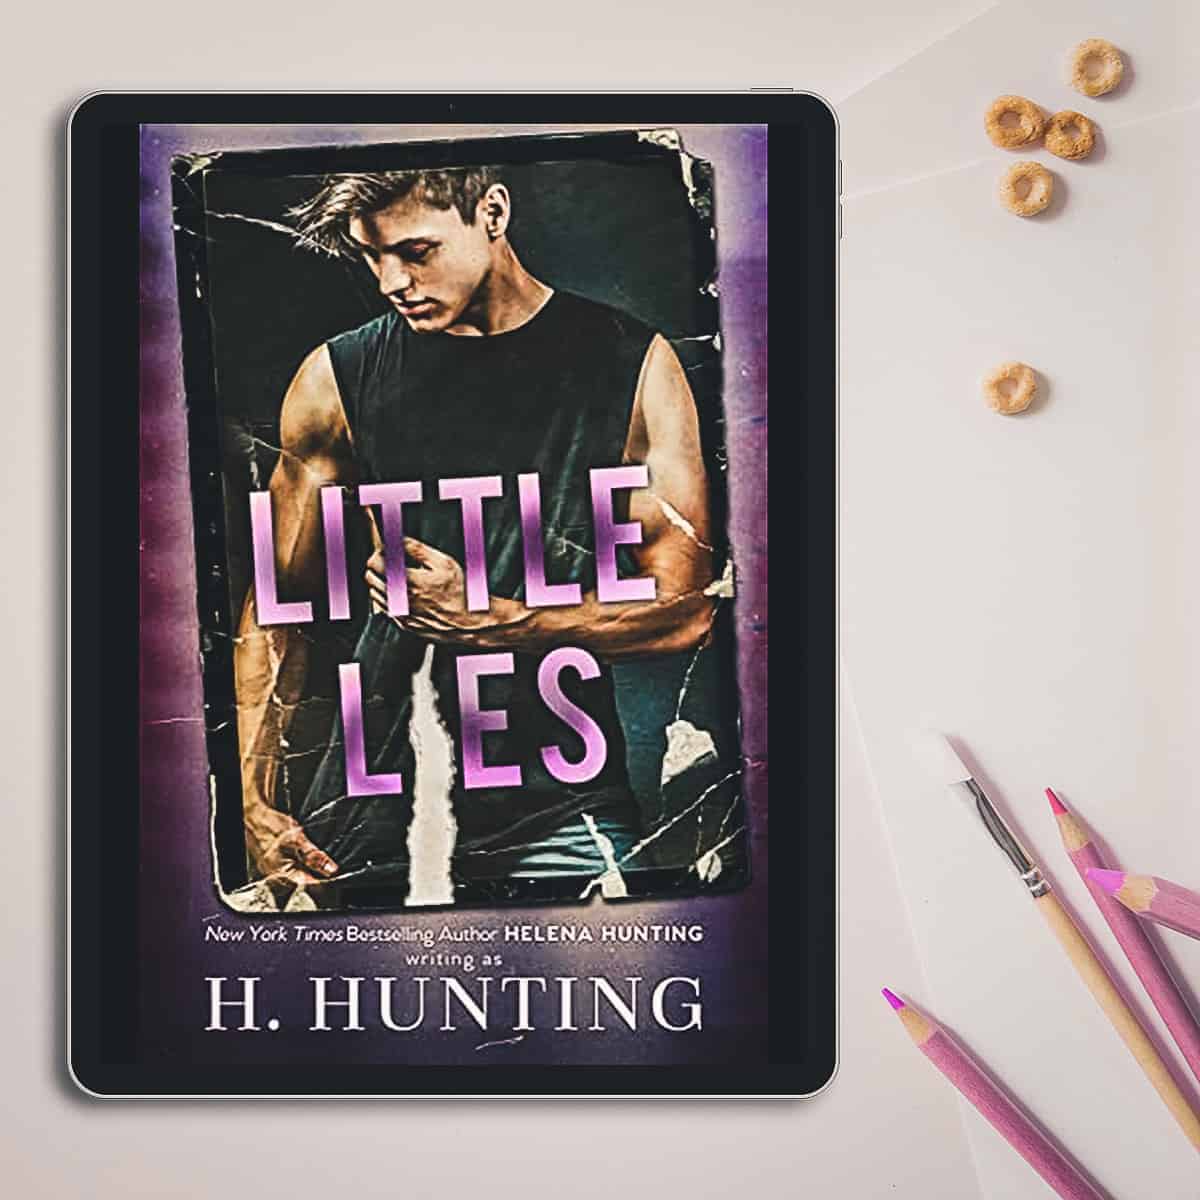 Little Lies by Helena Hunting (released as H Hunting) is an angsty, emotional new adult sports romance about Lavender Waters from the Pucked series and Kodiak Bowman from the All-In series.